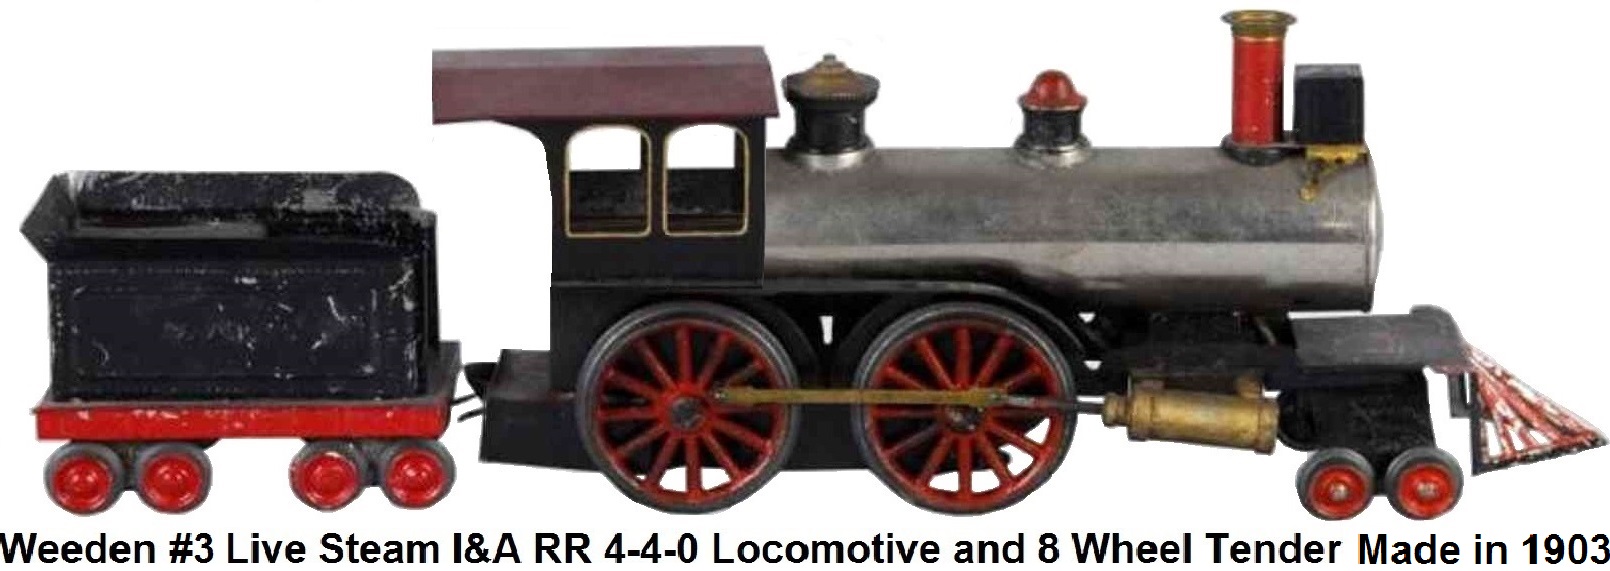 Weeden #3 Live Steam train engine and tender circa 1903 marked I&A RR